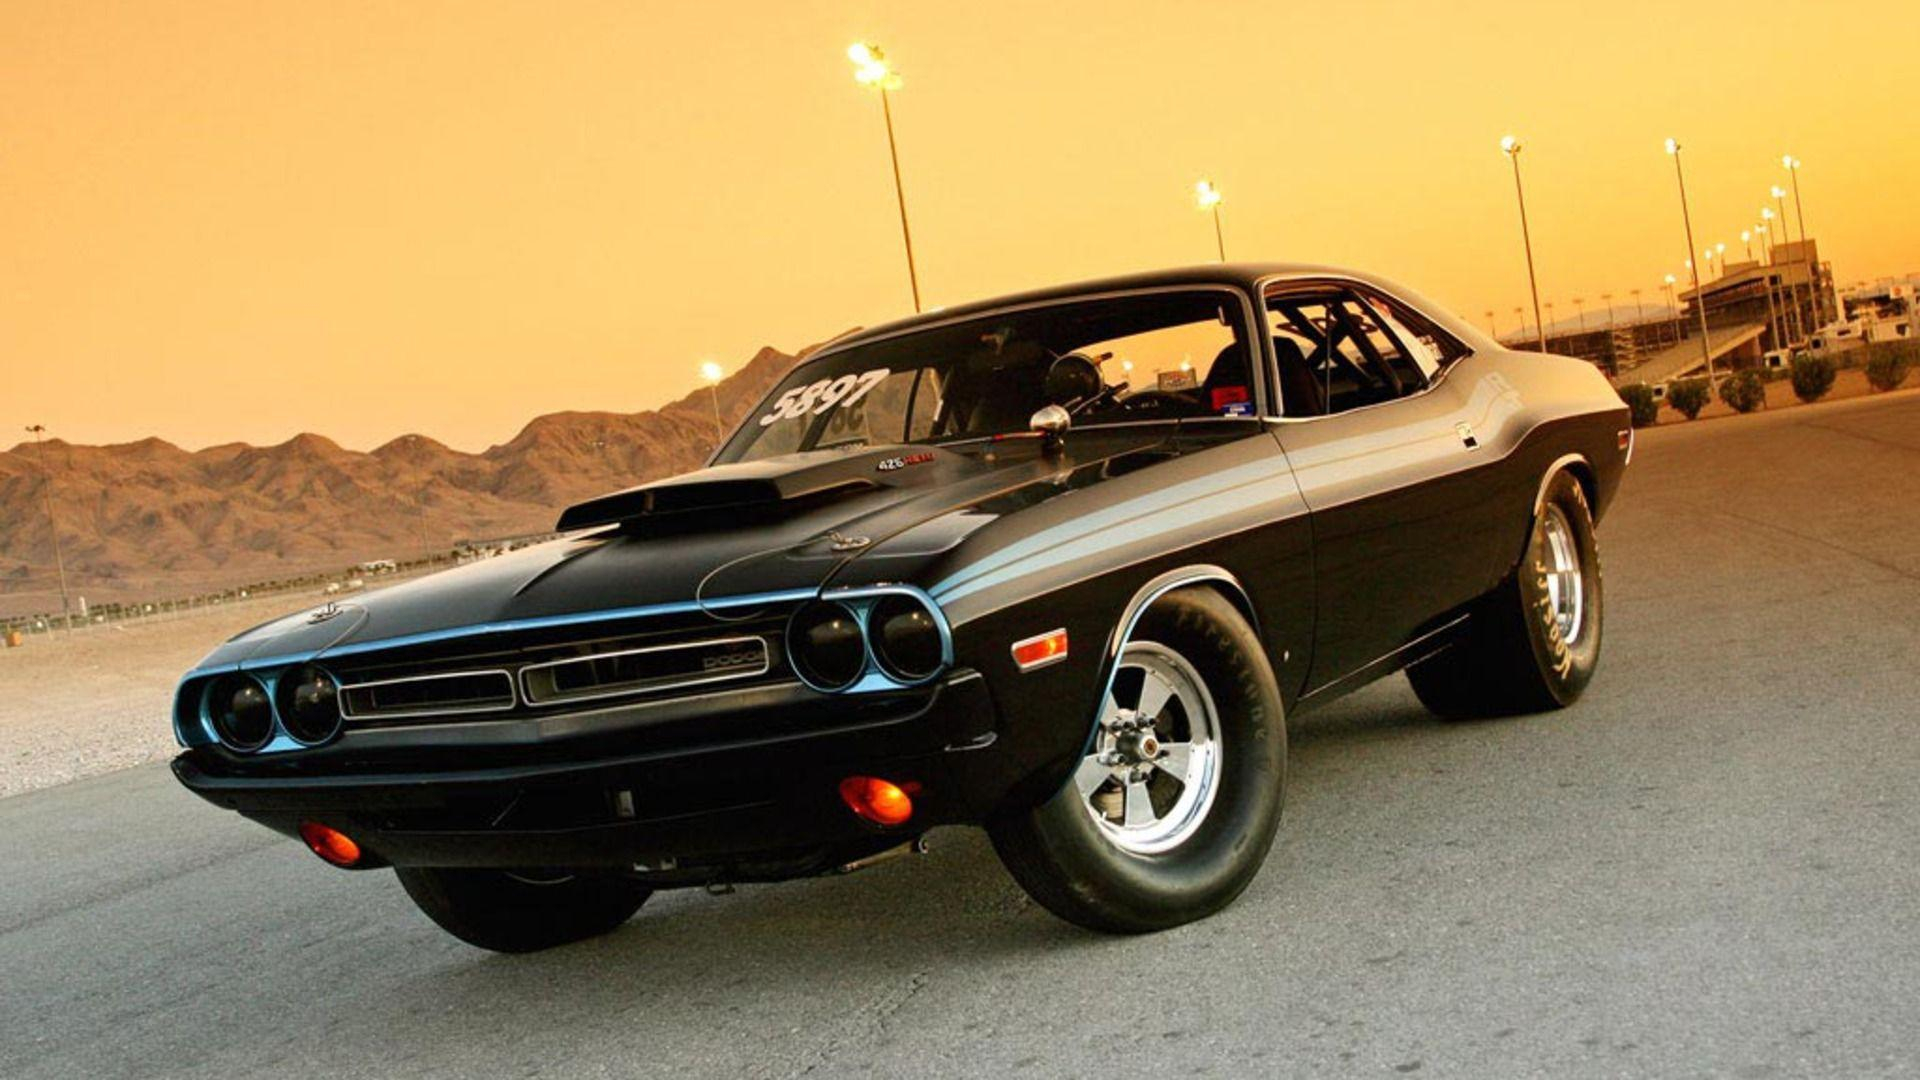 1920x1080 Free Muscle Car Wallpapers